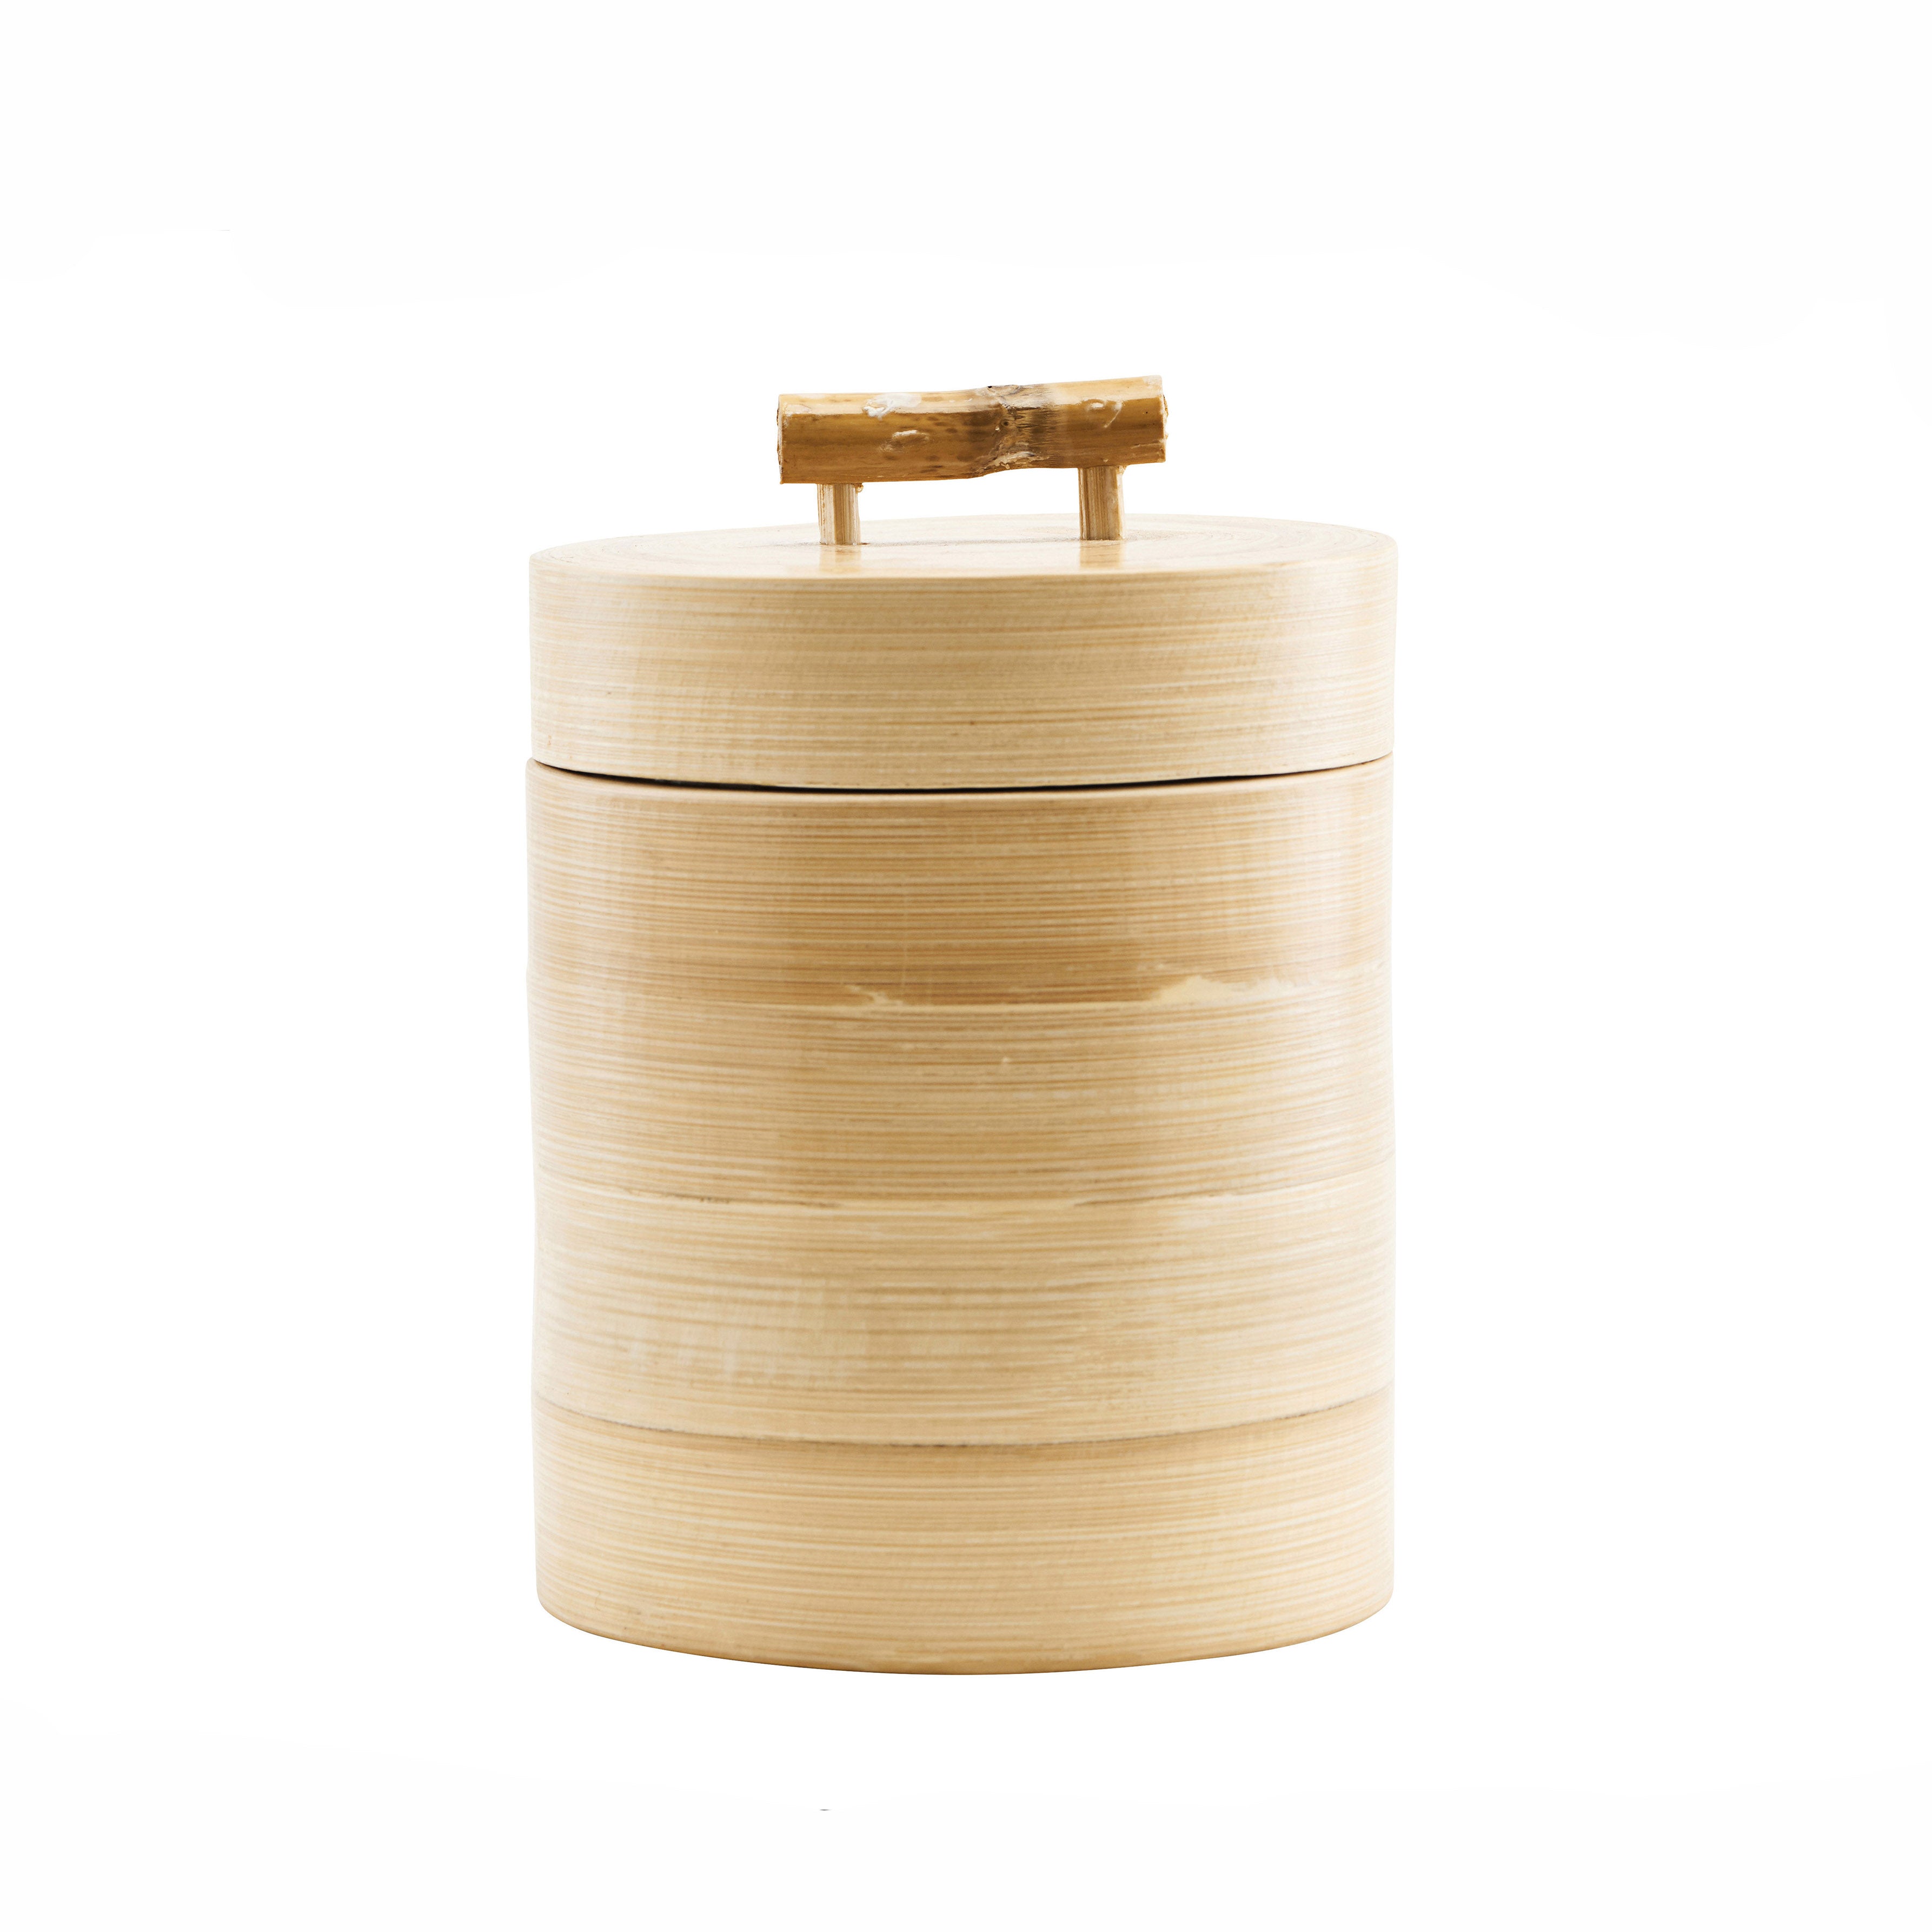 Tall Lidded Wooden Storage with Bamboo Handle